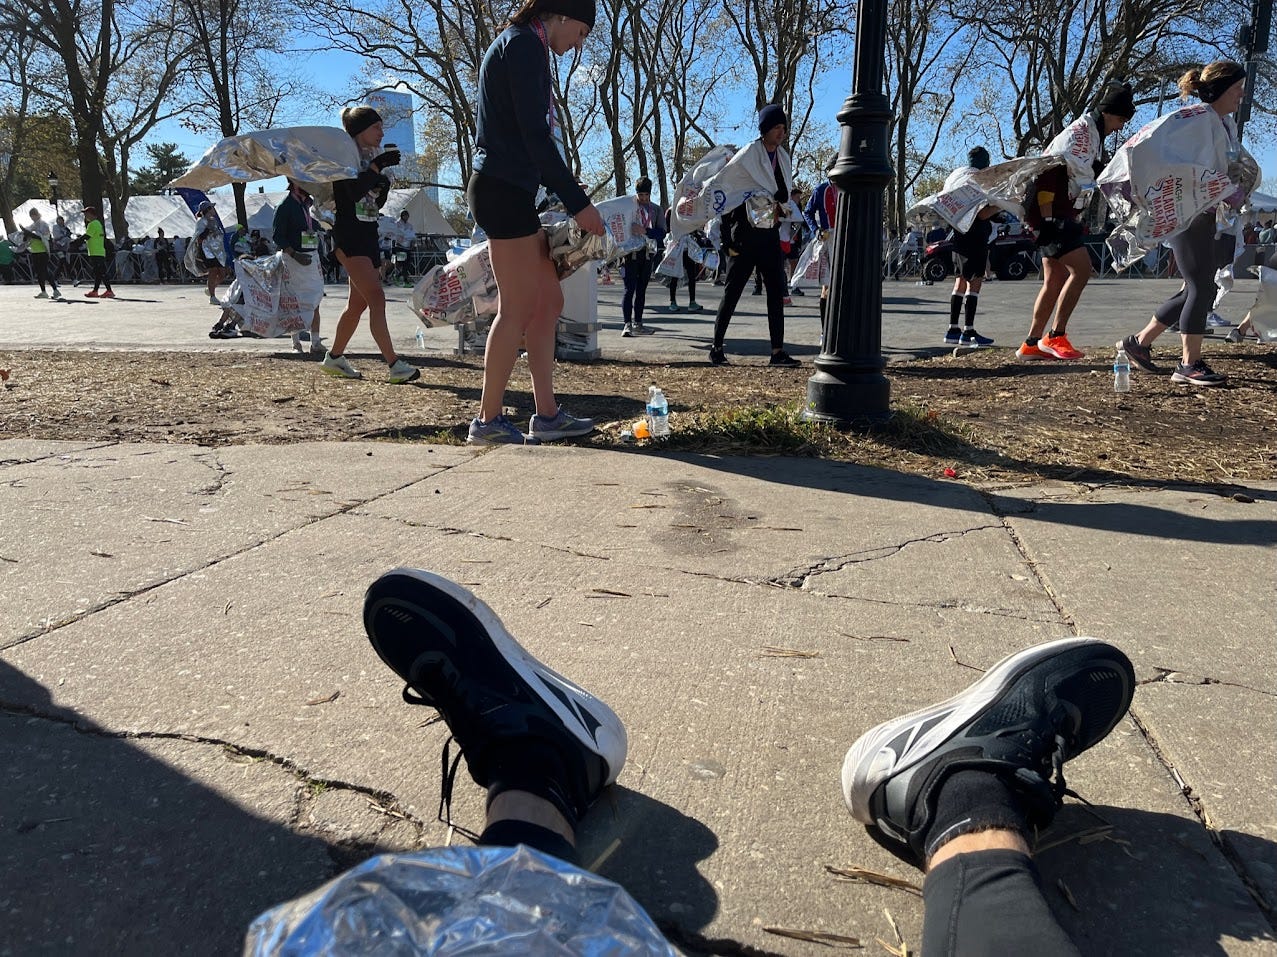 Runners after the Philadelphia marathon wearing space blankets